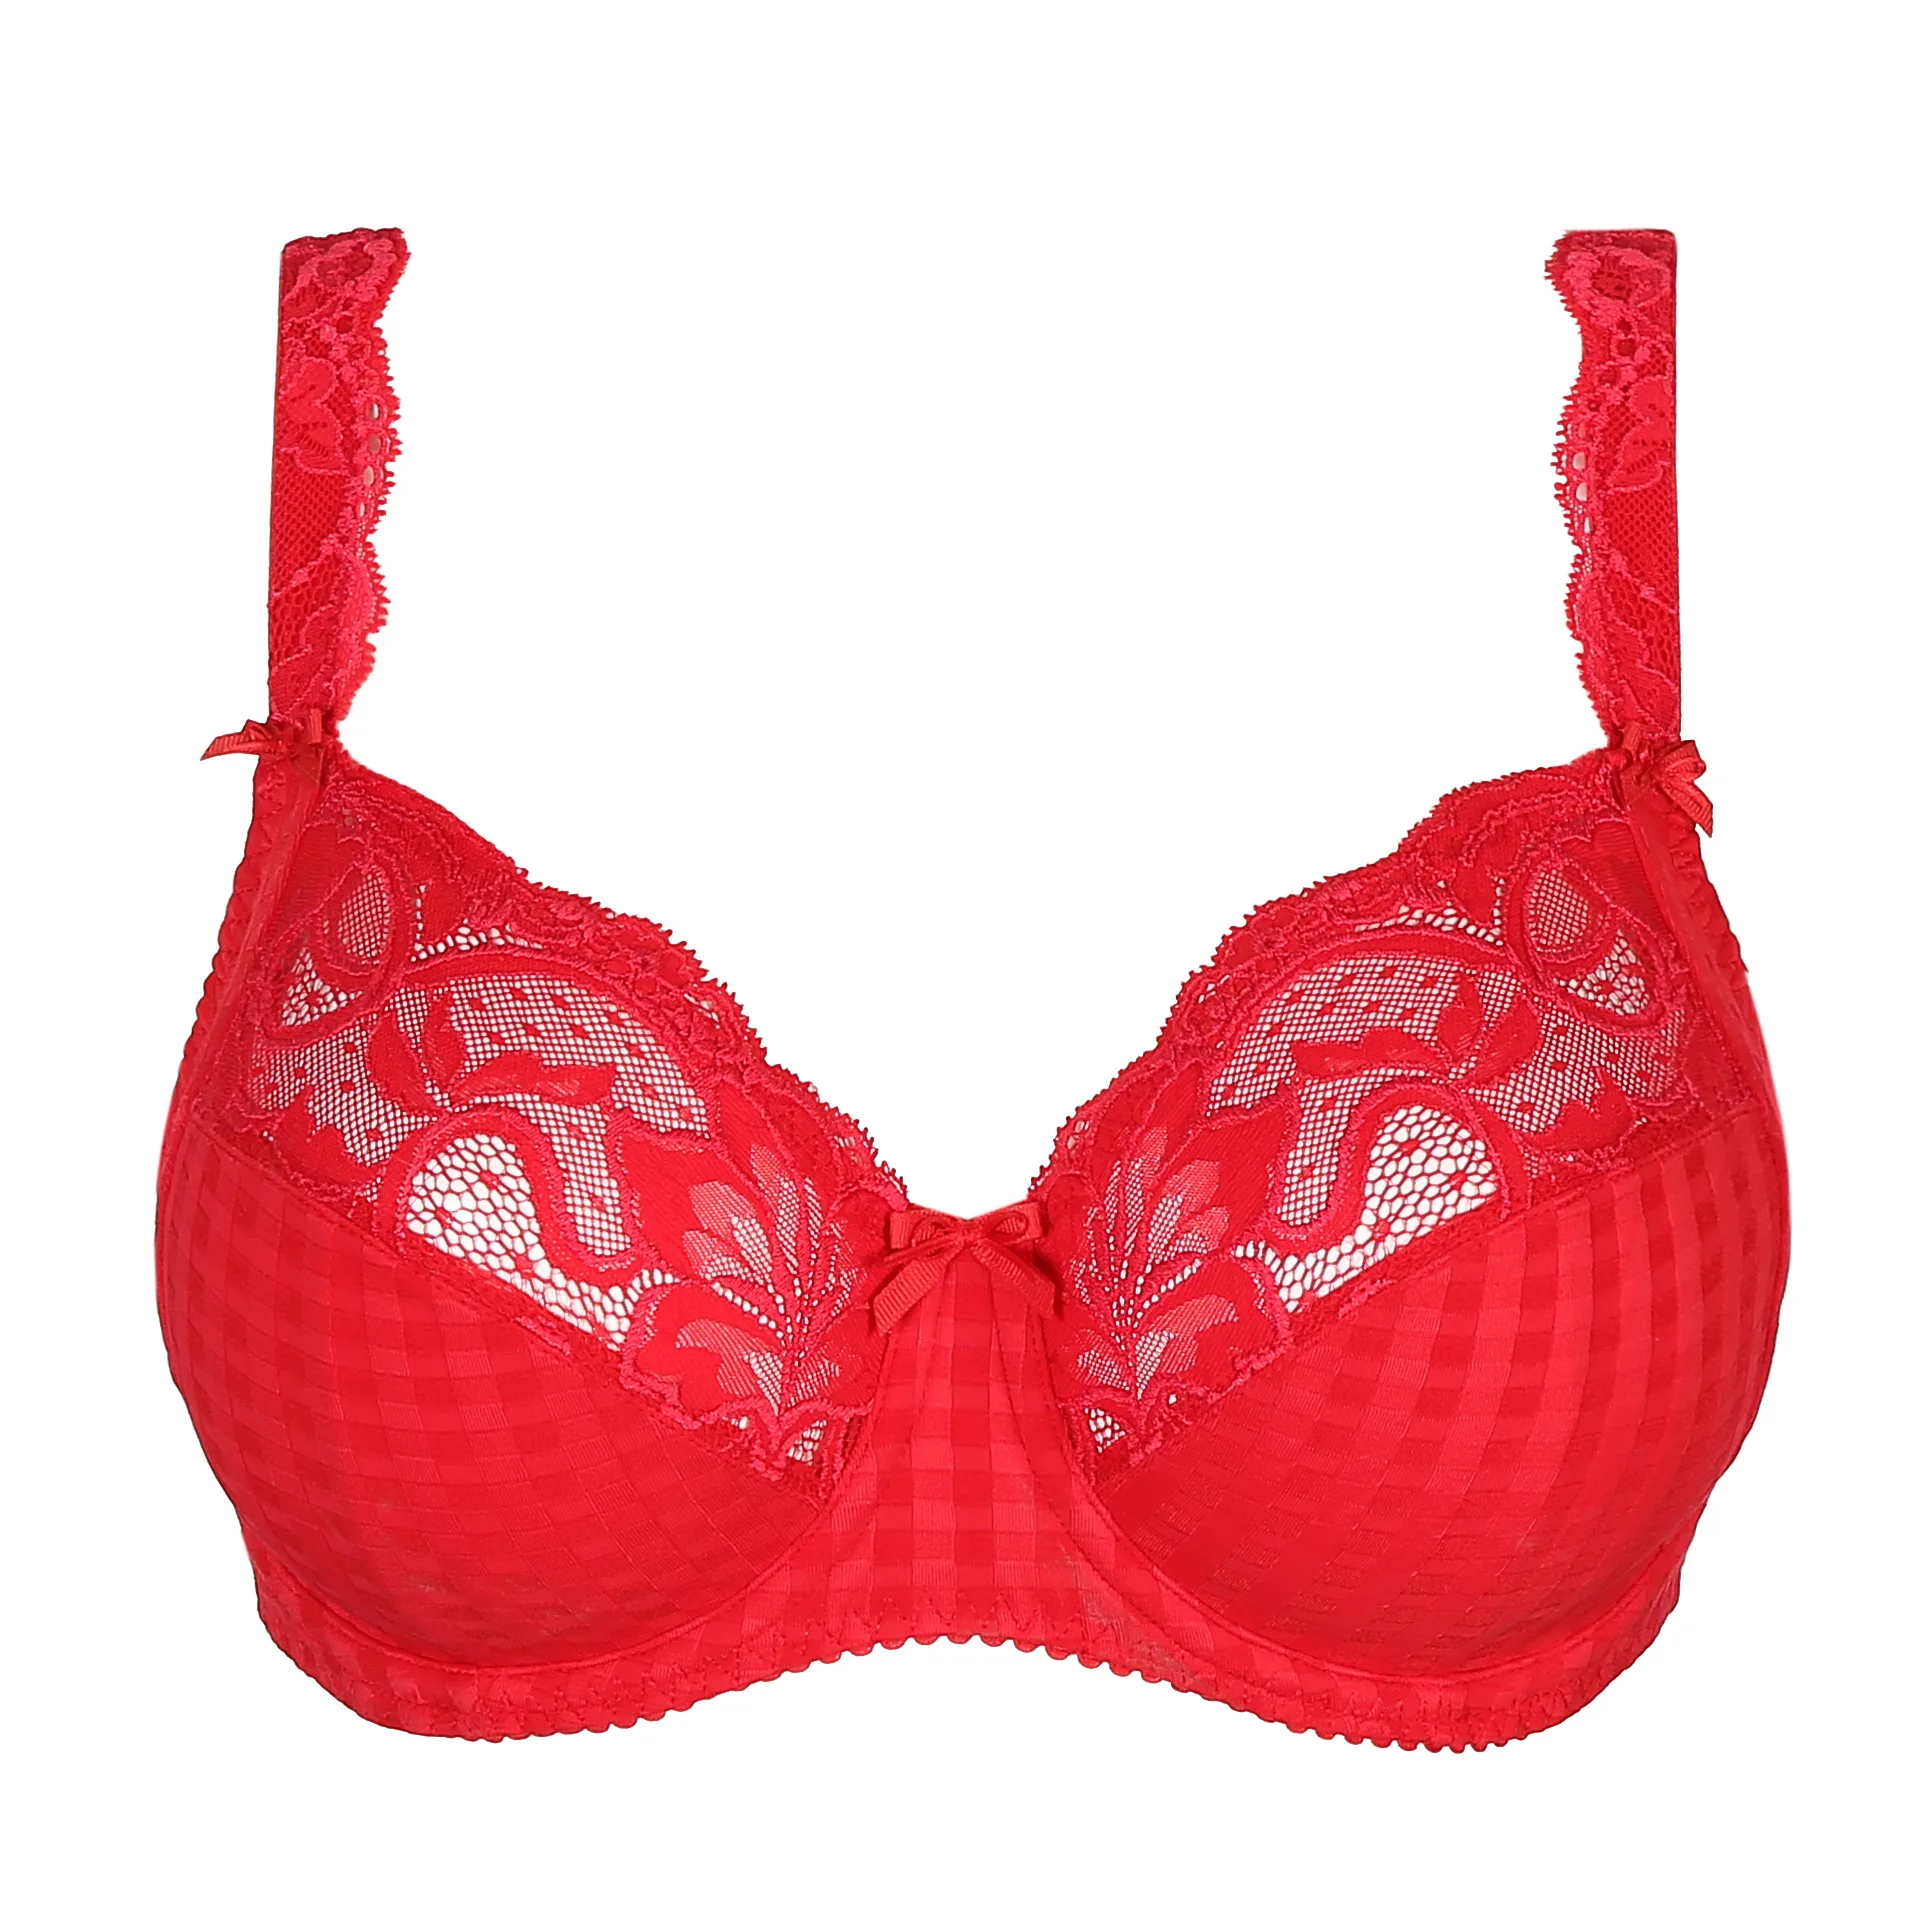 Prima Donna Madison Bra 162121 Underwired Full Cup 32f for sale online